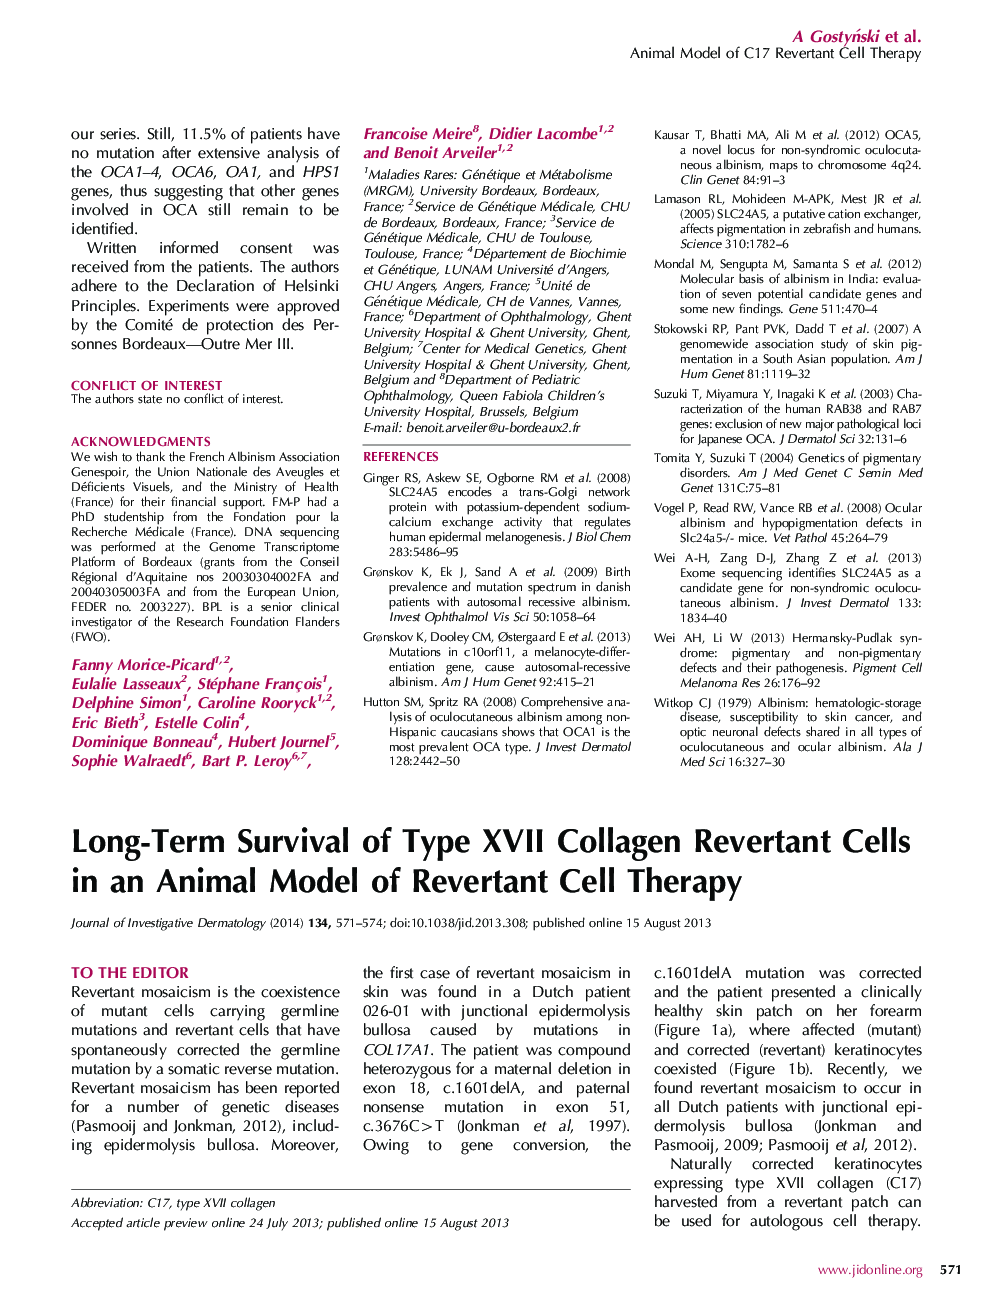 Long-Term Survival of Type XVII Collagen Revertant Cells in an Animal Model of Revertant Cell Therapy